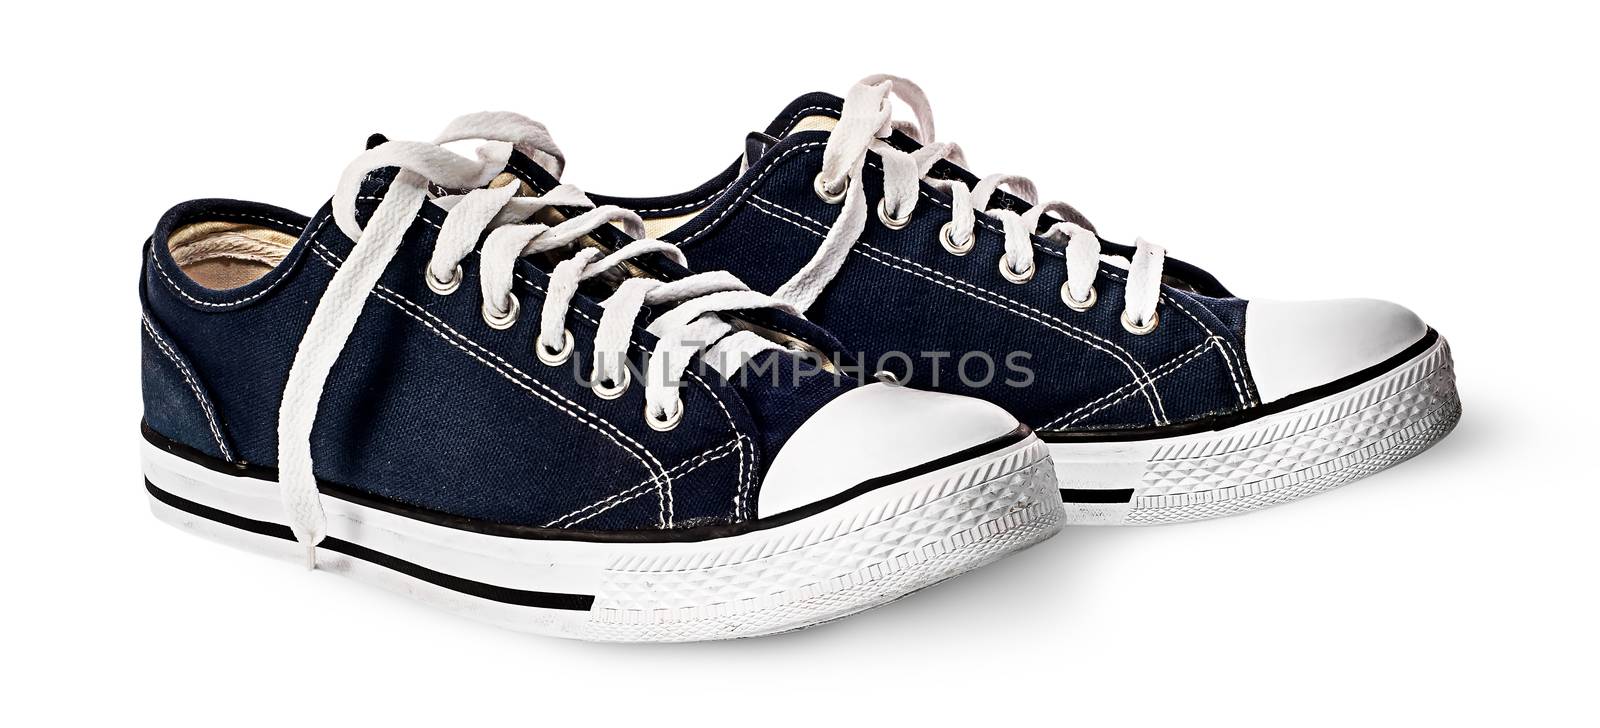 One pair of dark blue sports shoes beside isolated on white background